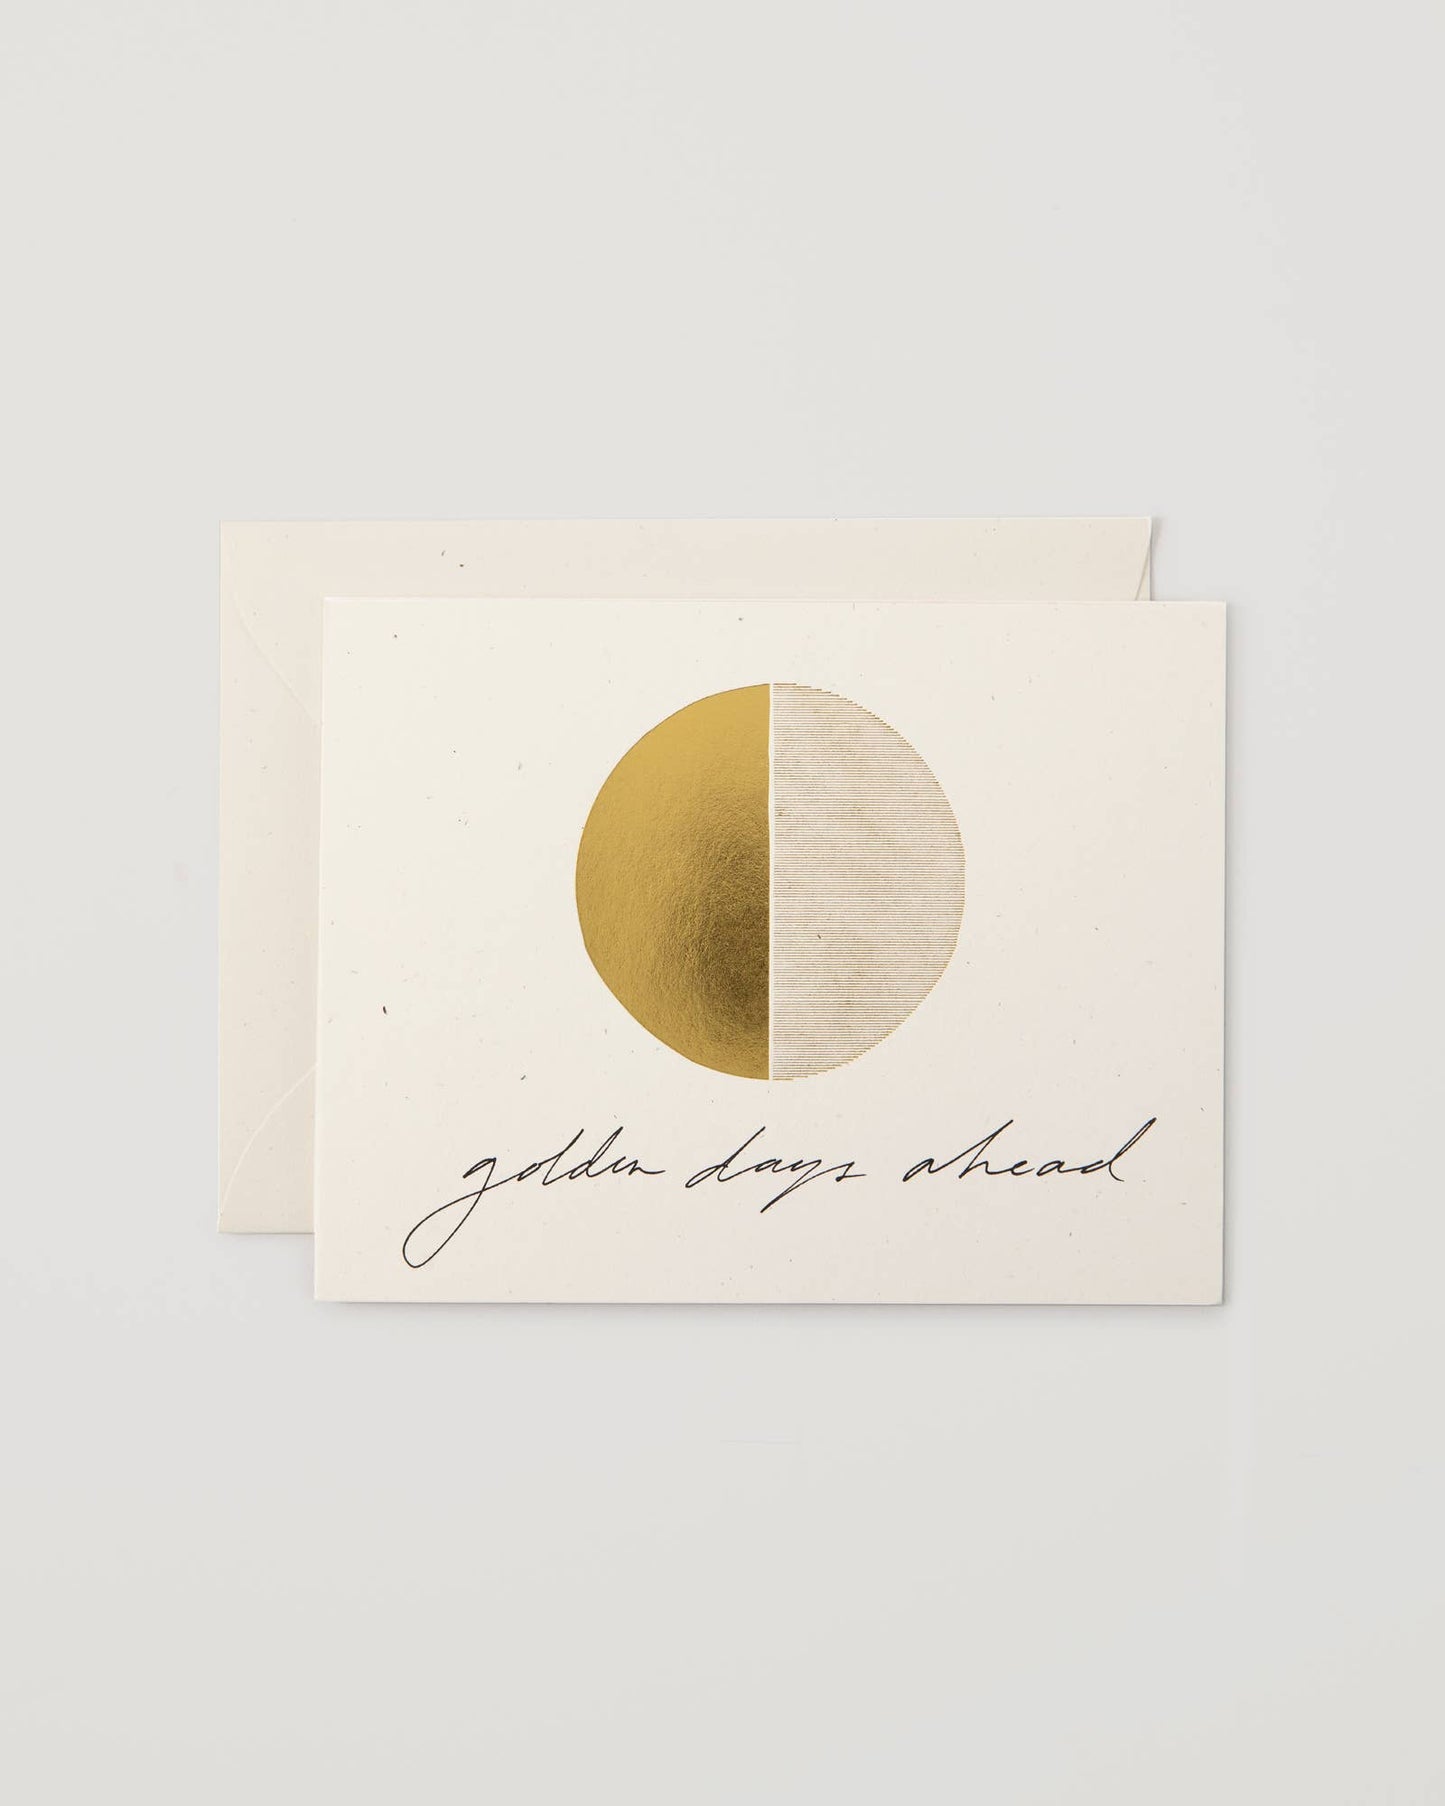 Greeting Card ~ Golden Days Ahead